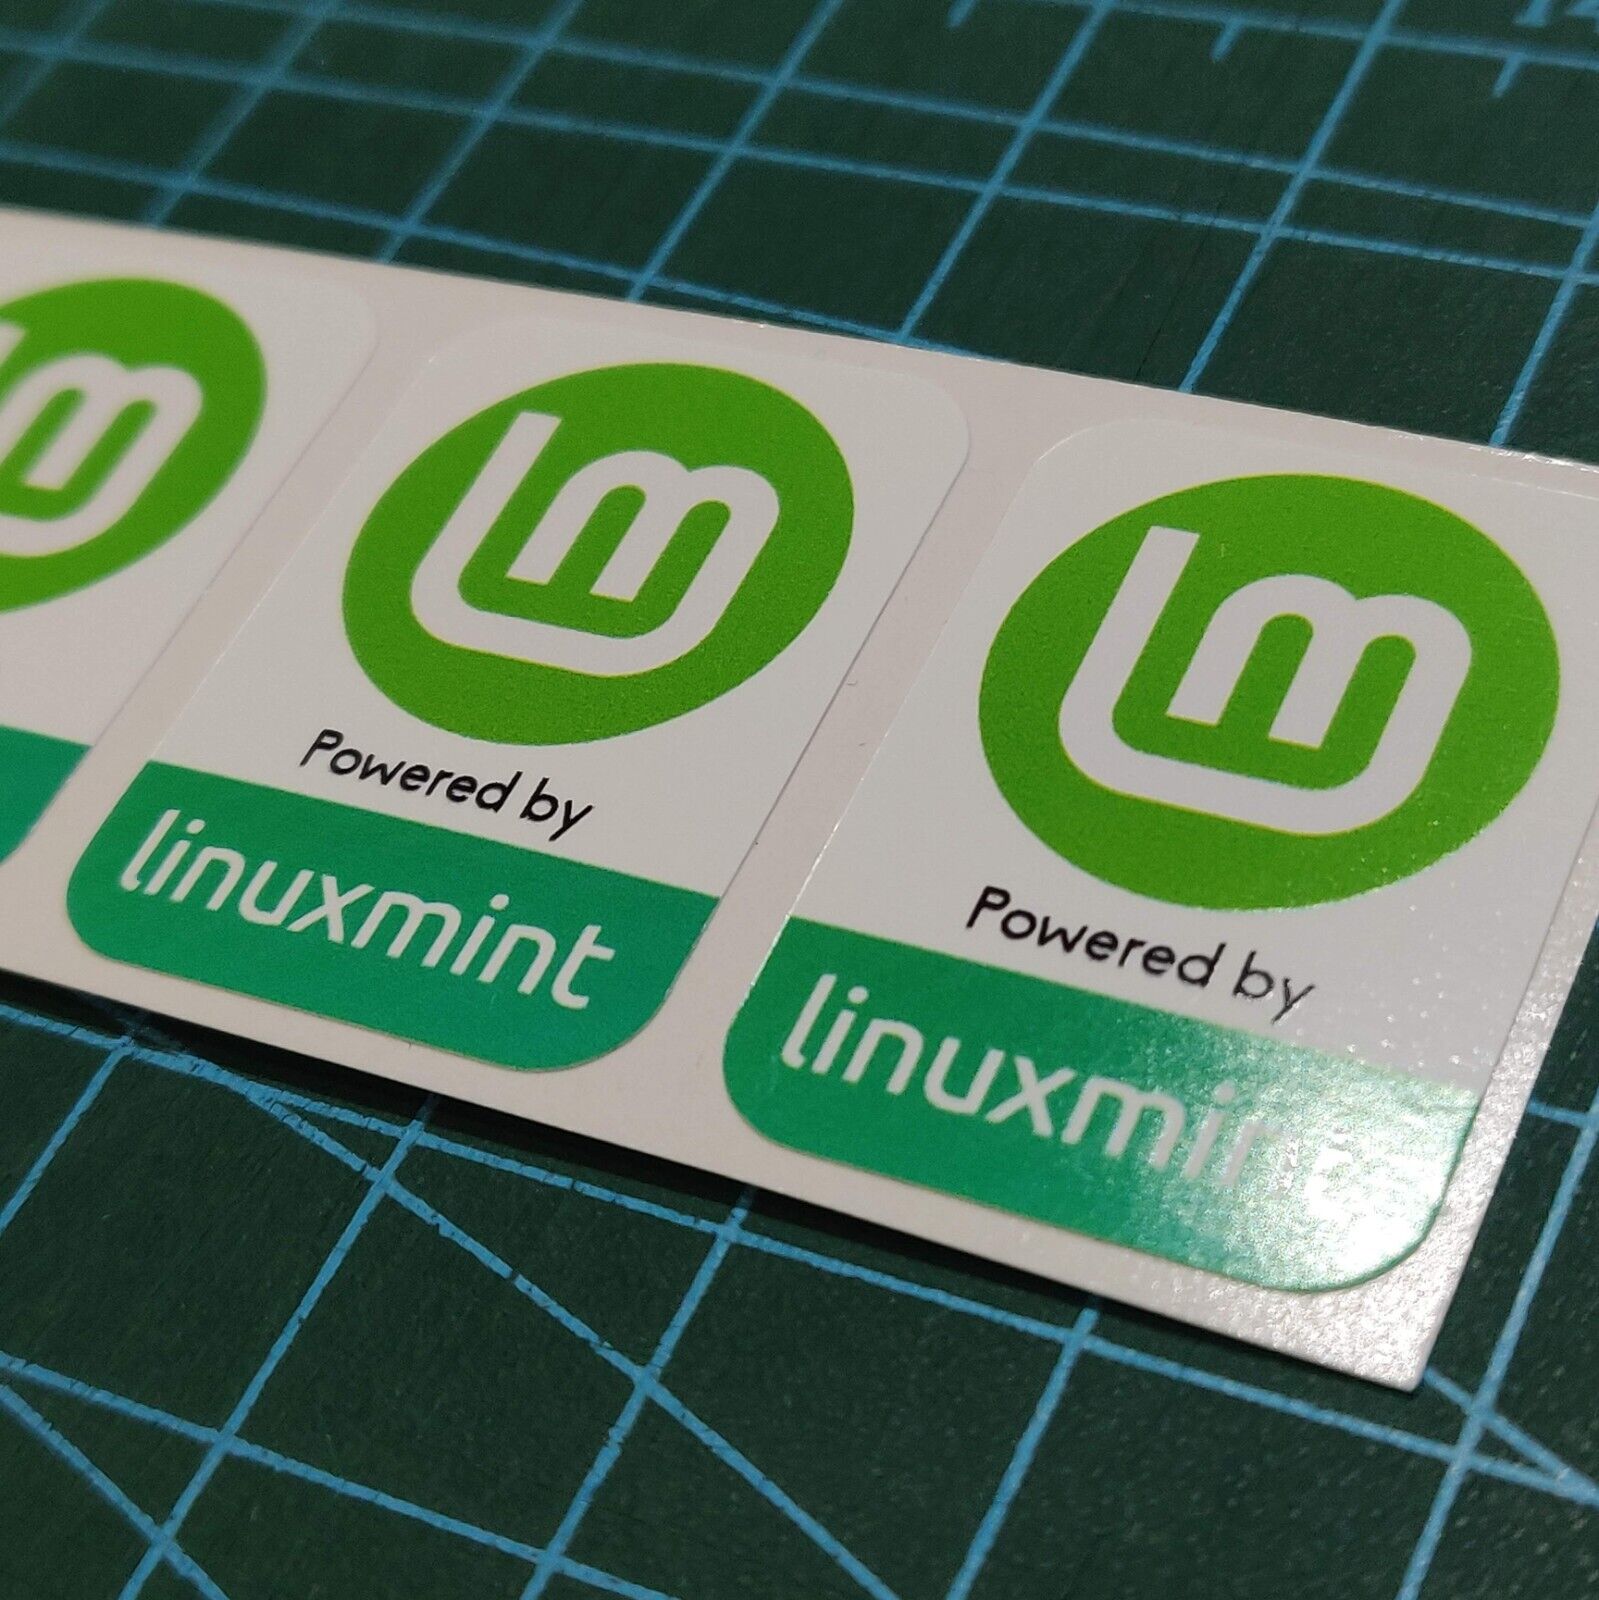 3x Linux Mint Computer Decals - Powered By linuxmint Stickers